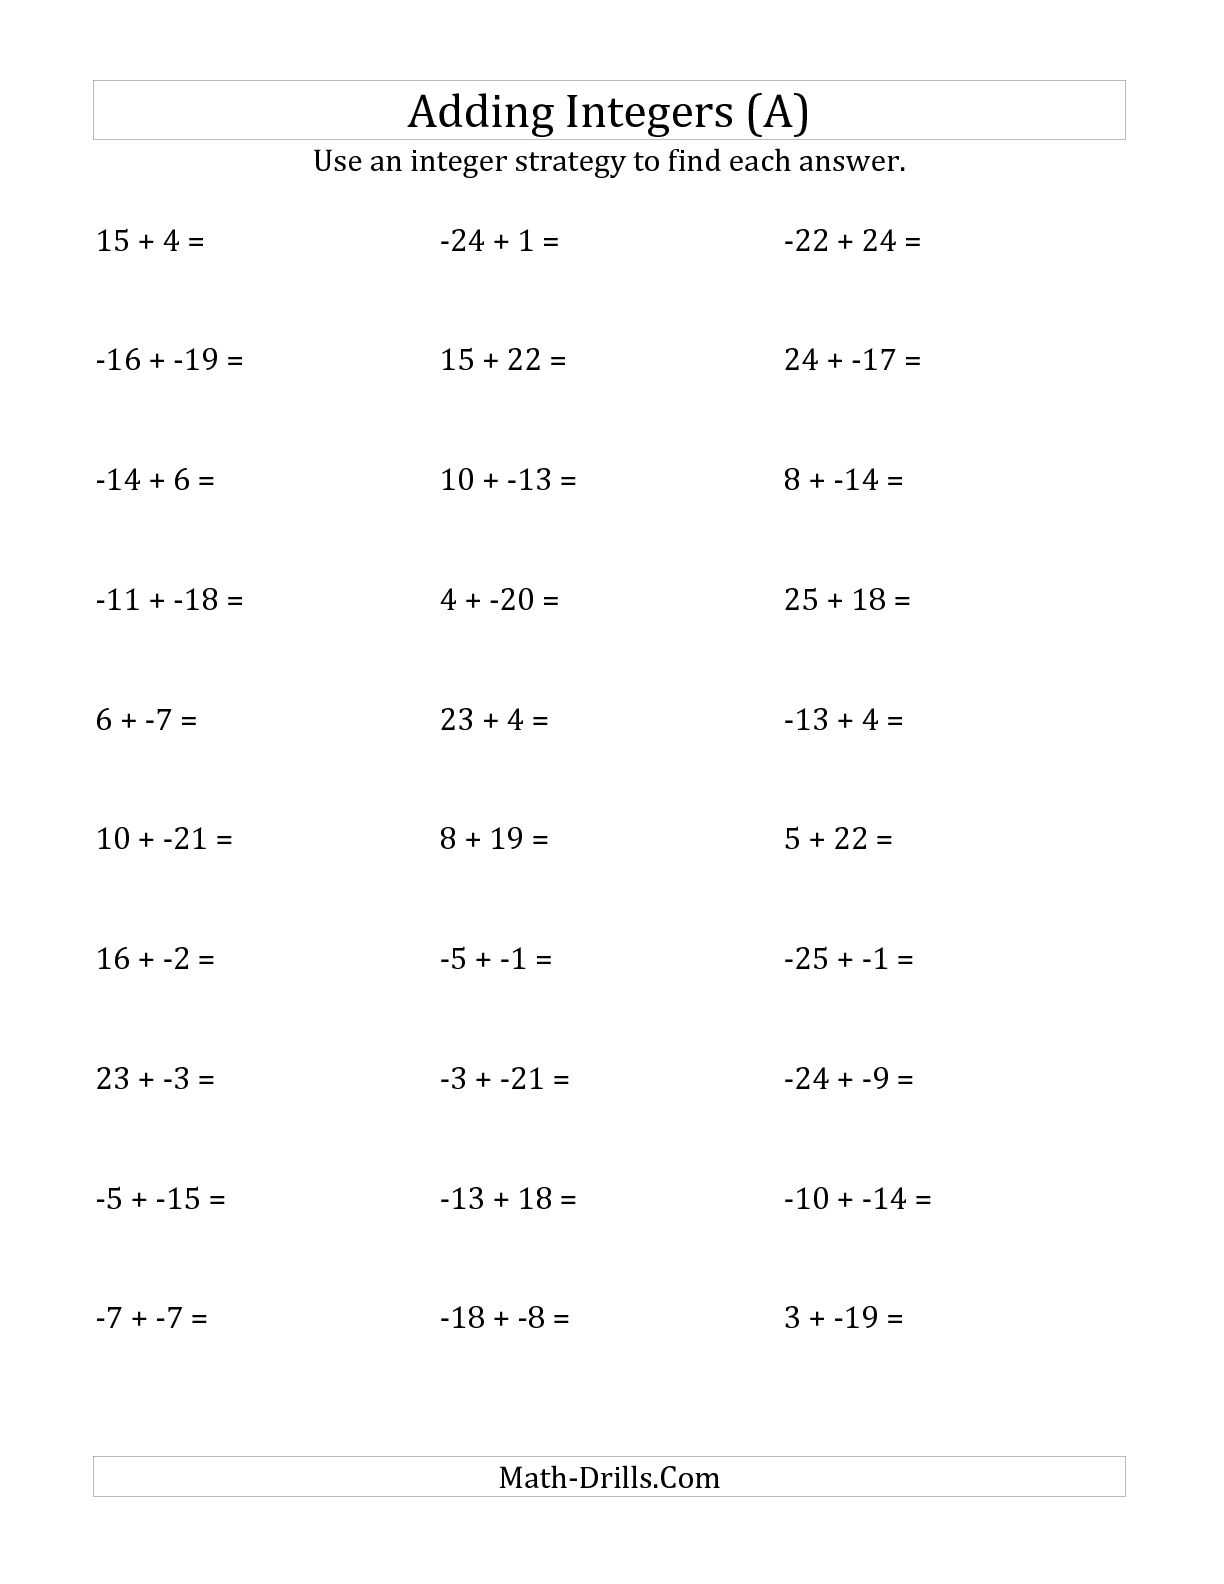 Addition Of Integers Worksheet as Well as Math Worksheets Integers